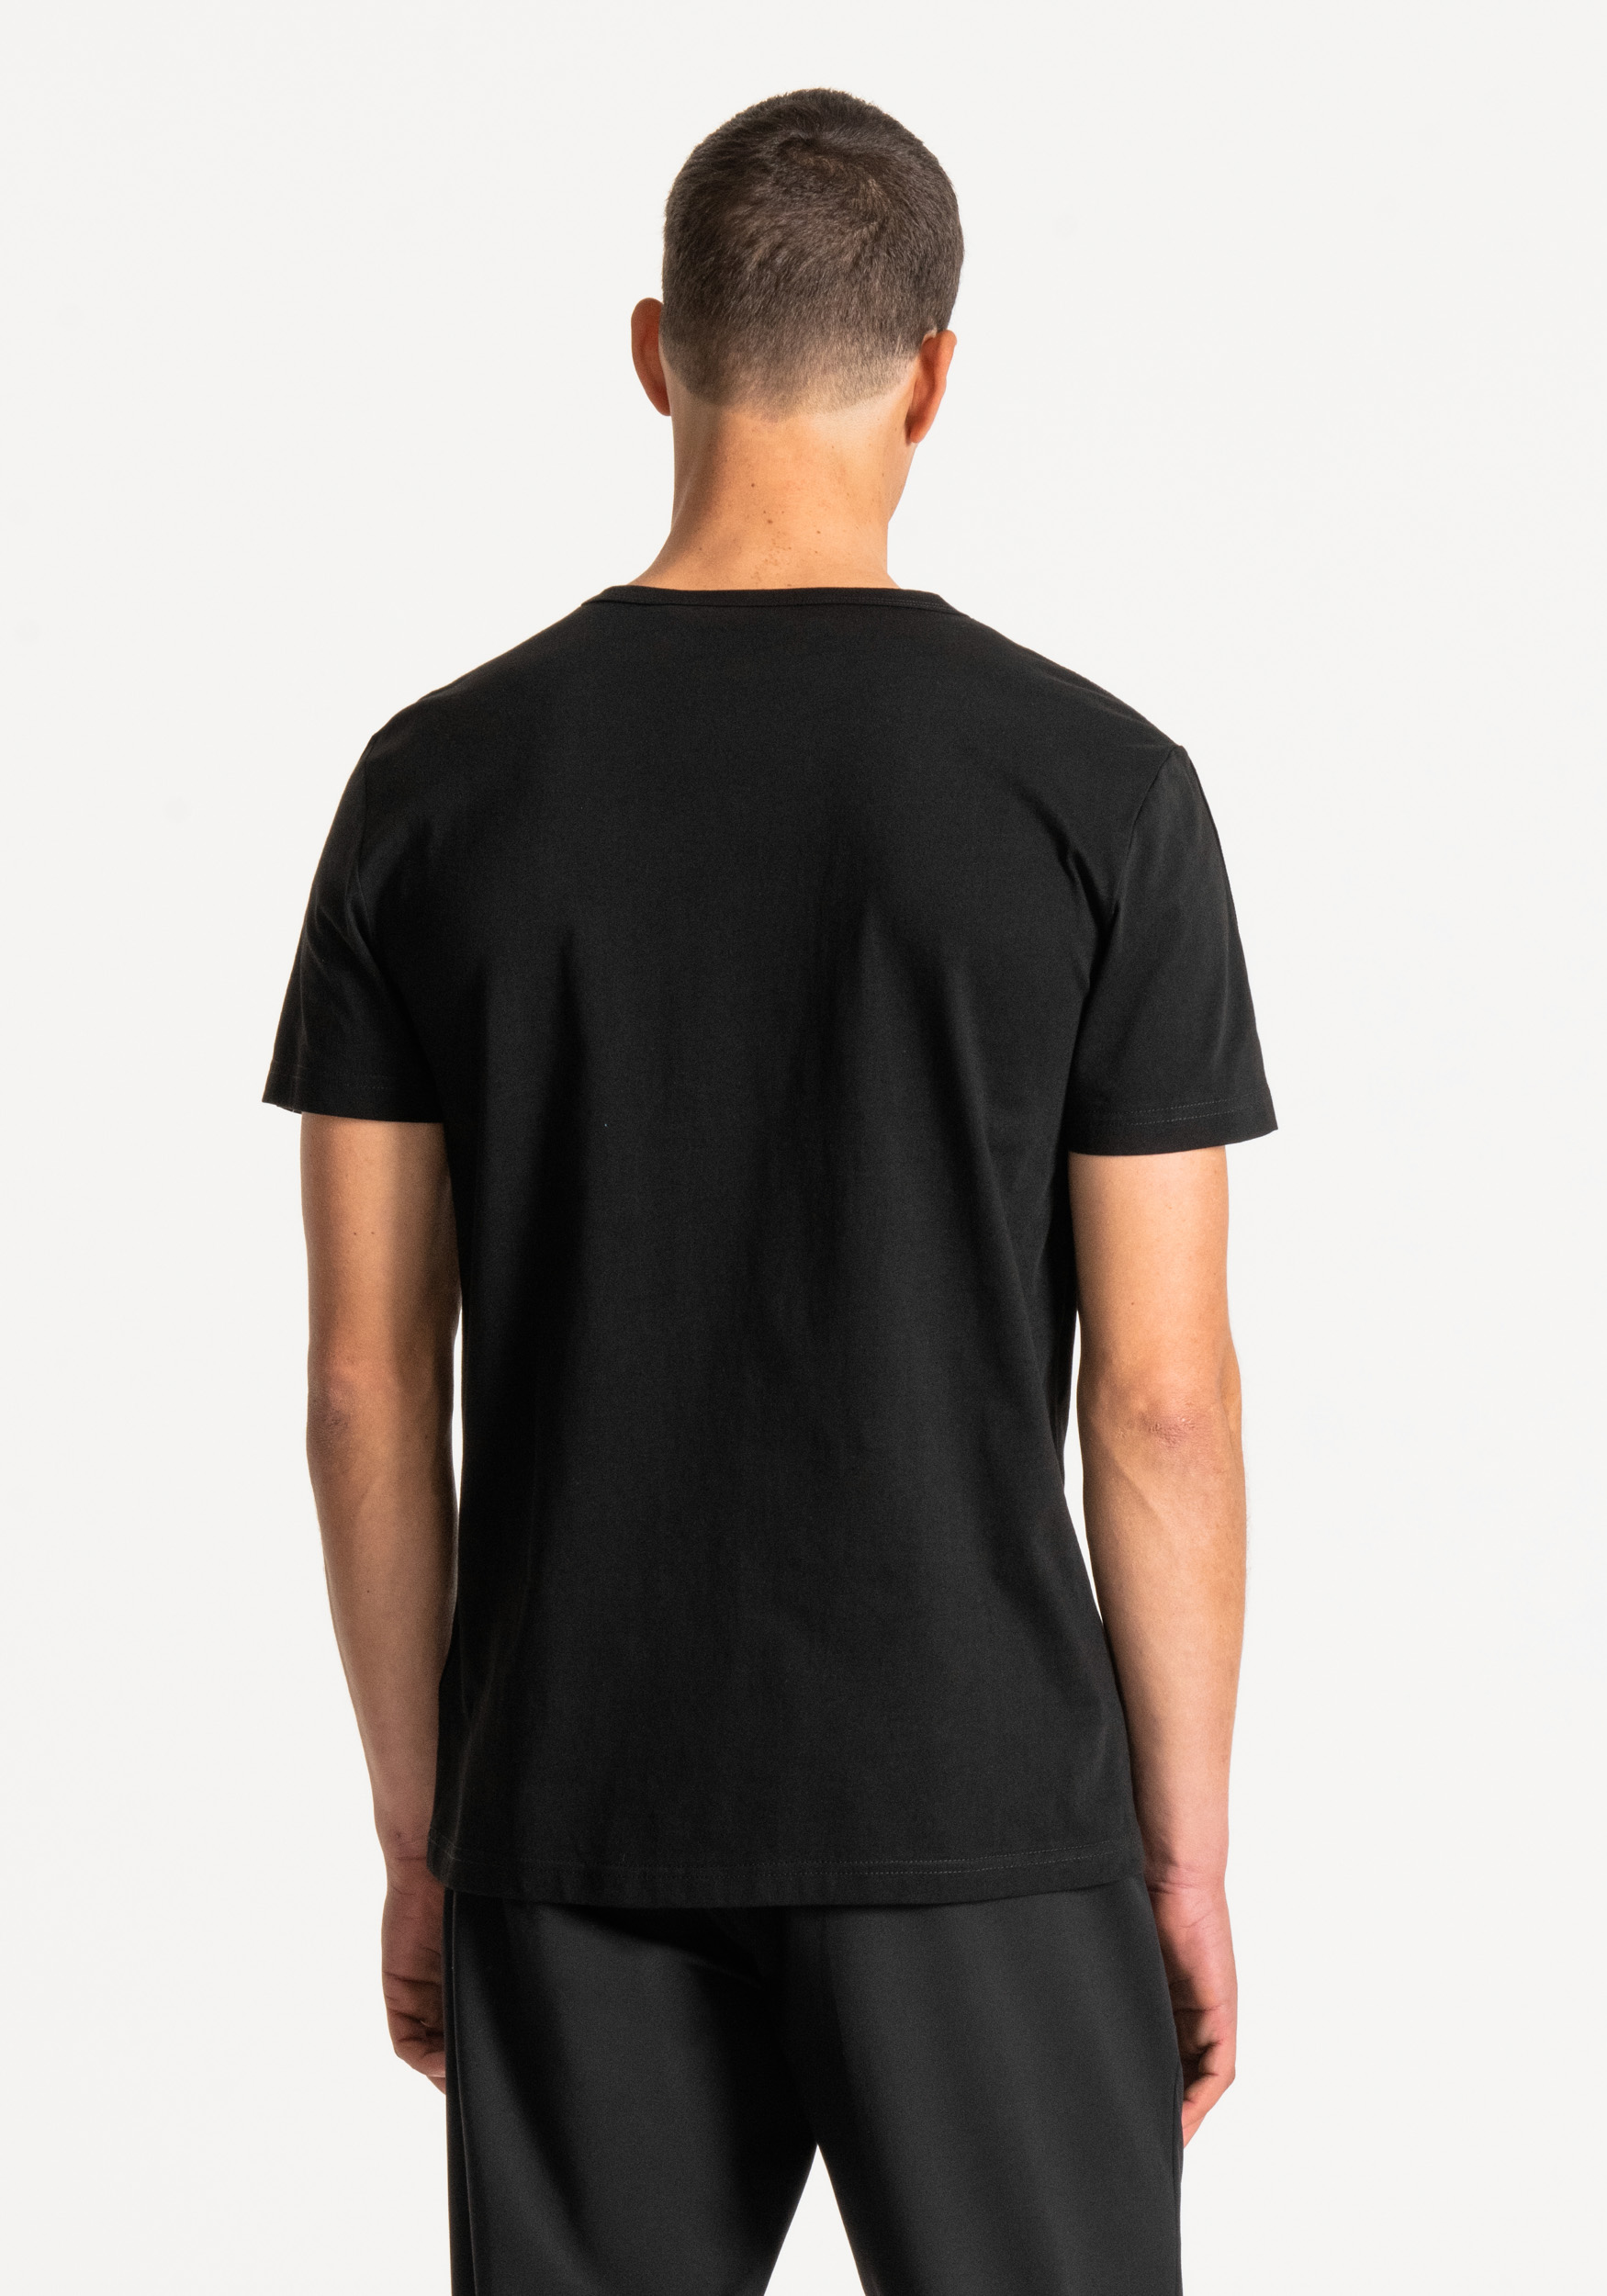 CREW-NECK T-SHIRT IN 100% COTTON WITH LOGO BAND DETAIL ON SLEEVES - Antony Morato Online Shop